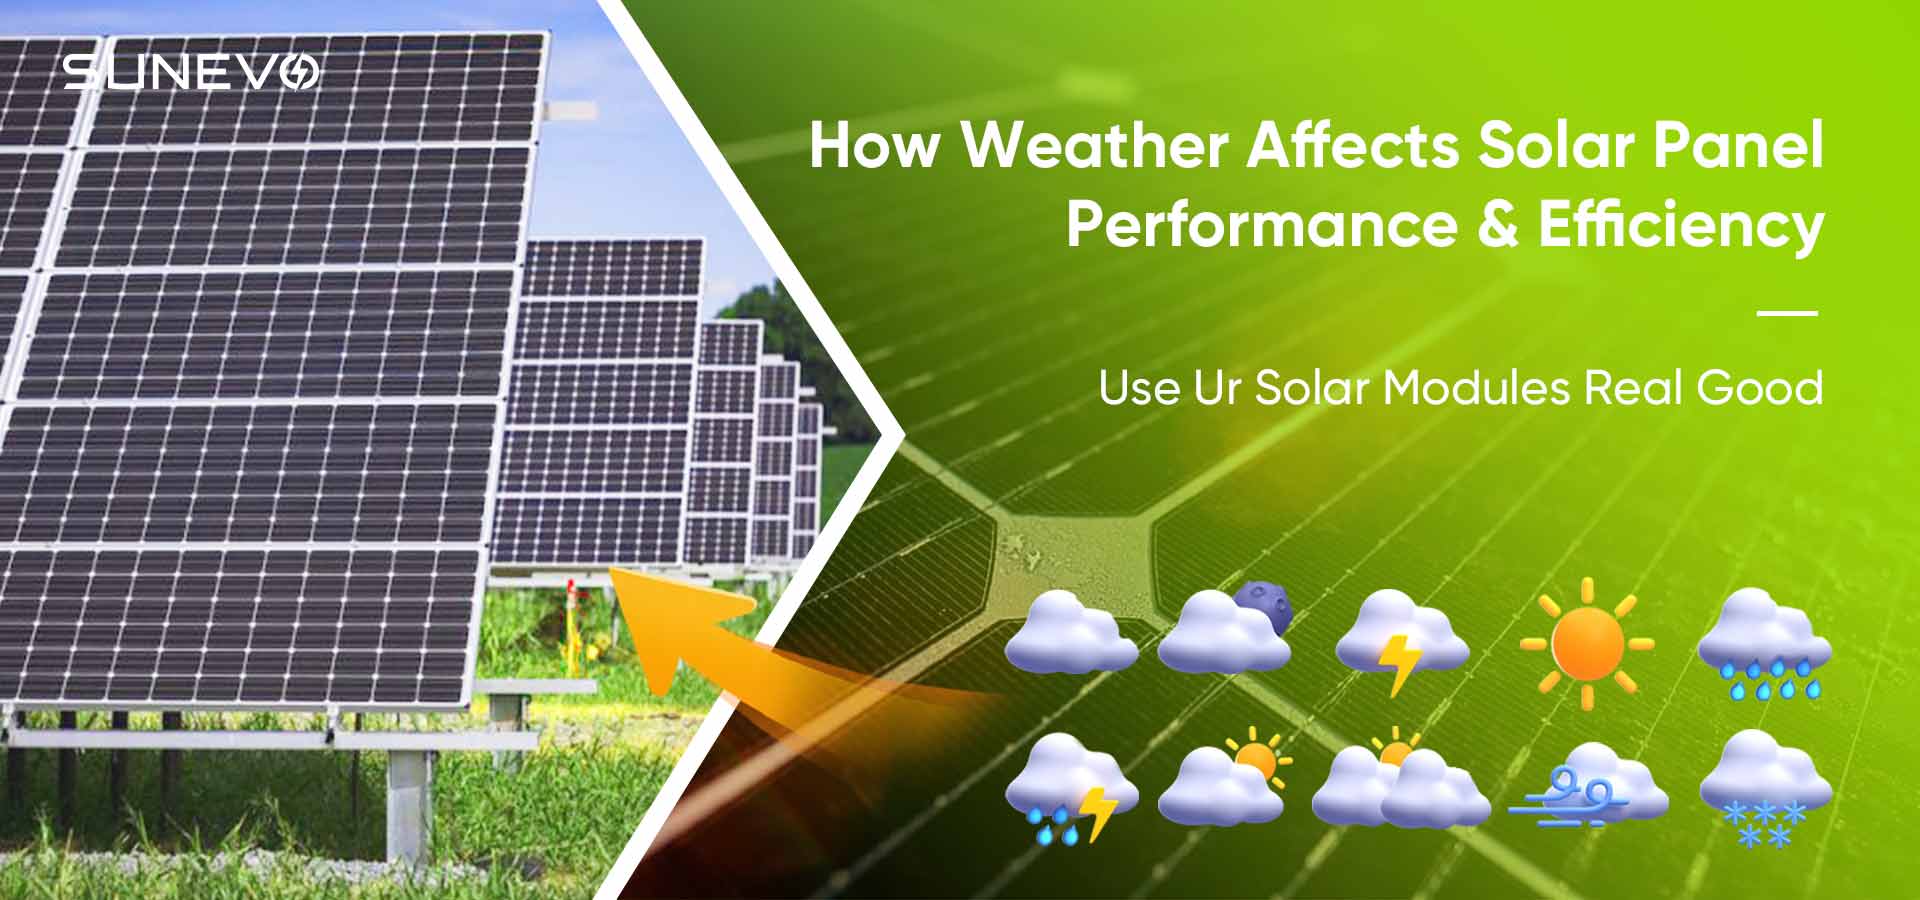 Solar Panel Efficiency: How Weather Affects Performance